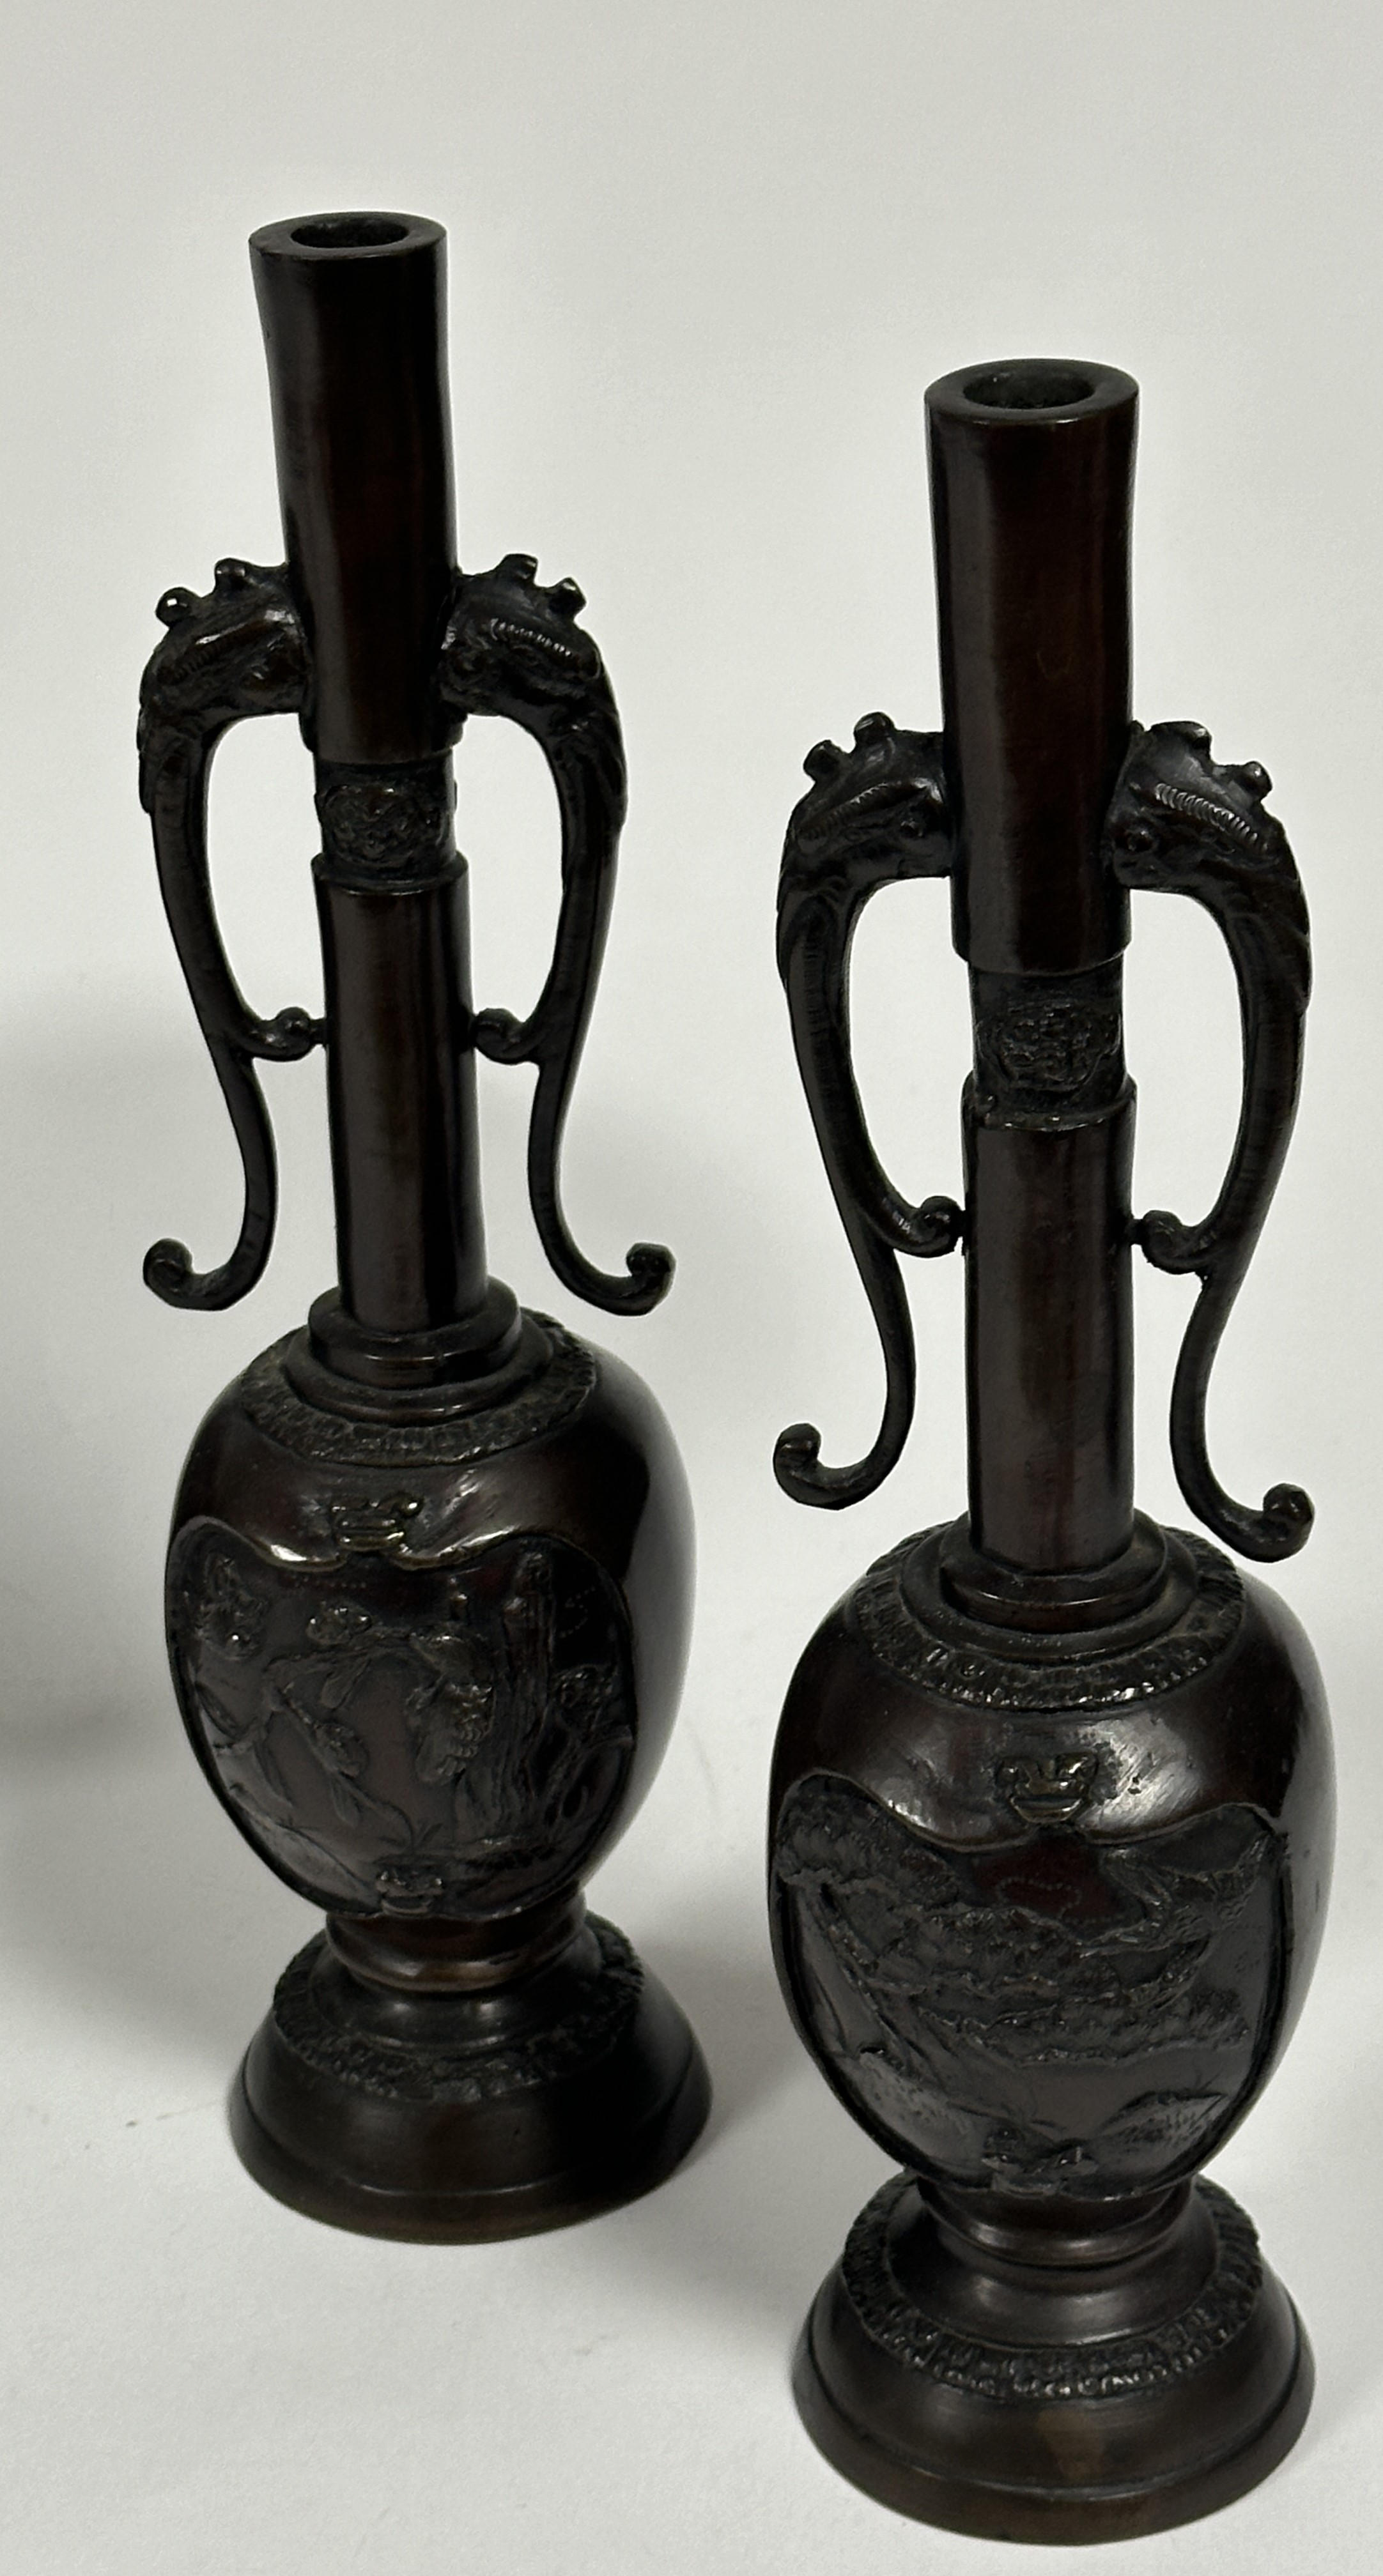 A Japanese patinated bronze jardiniere of paneled tapered design with cast bird and floral - Image 3 of 5